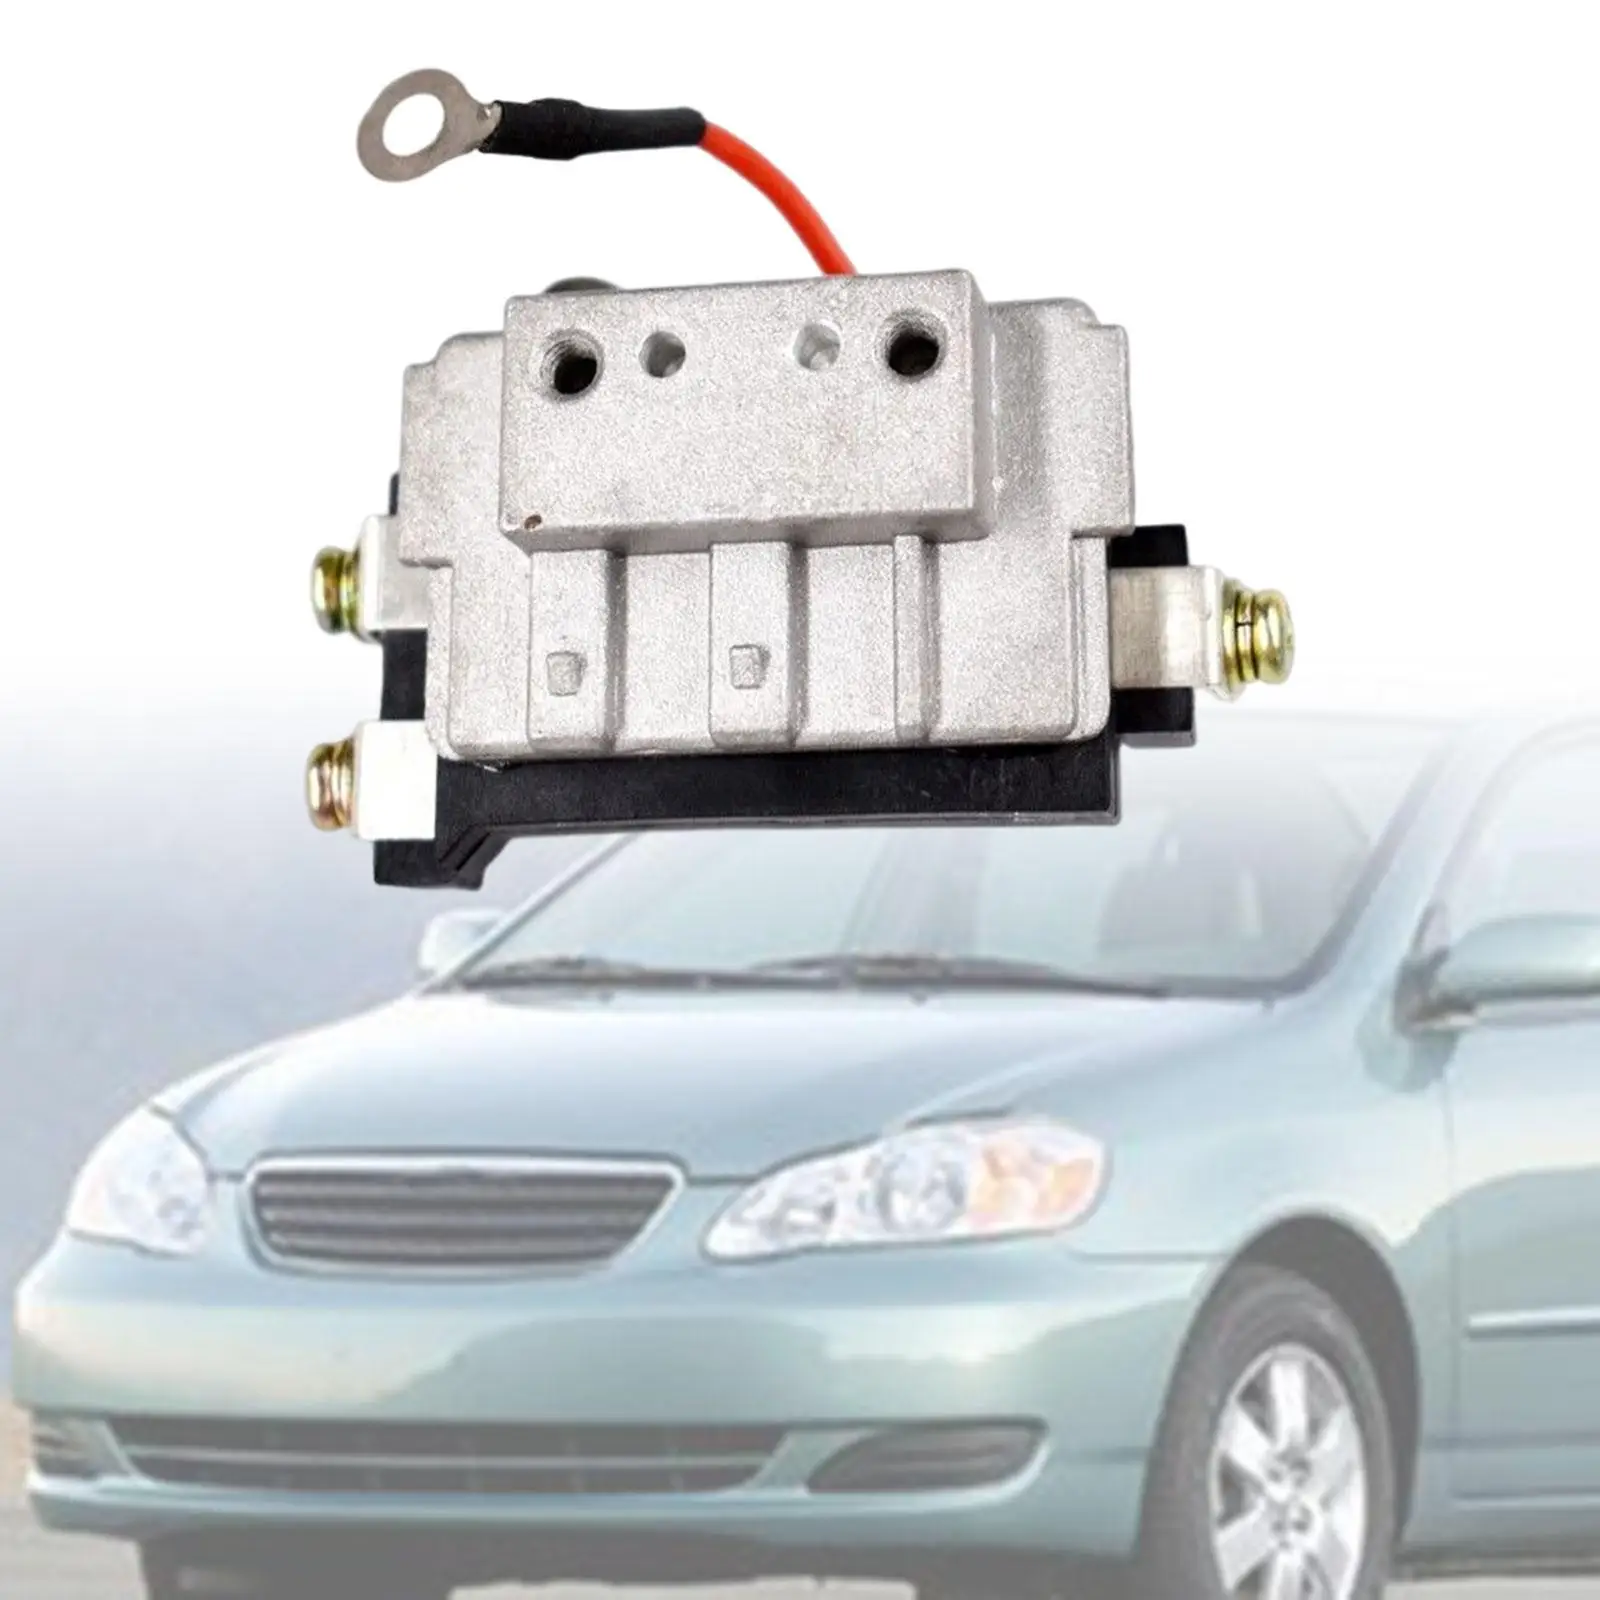 Ignition Module Accessory Replaces Professional Auto Motor Durable Easy to